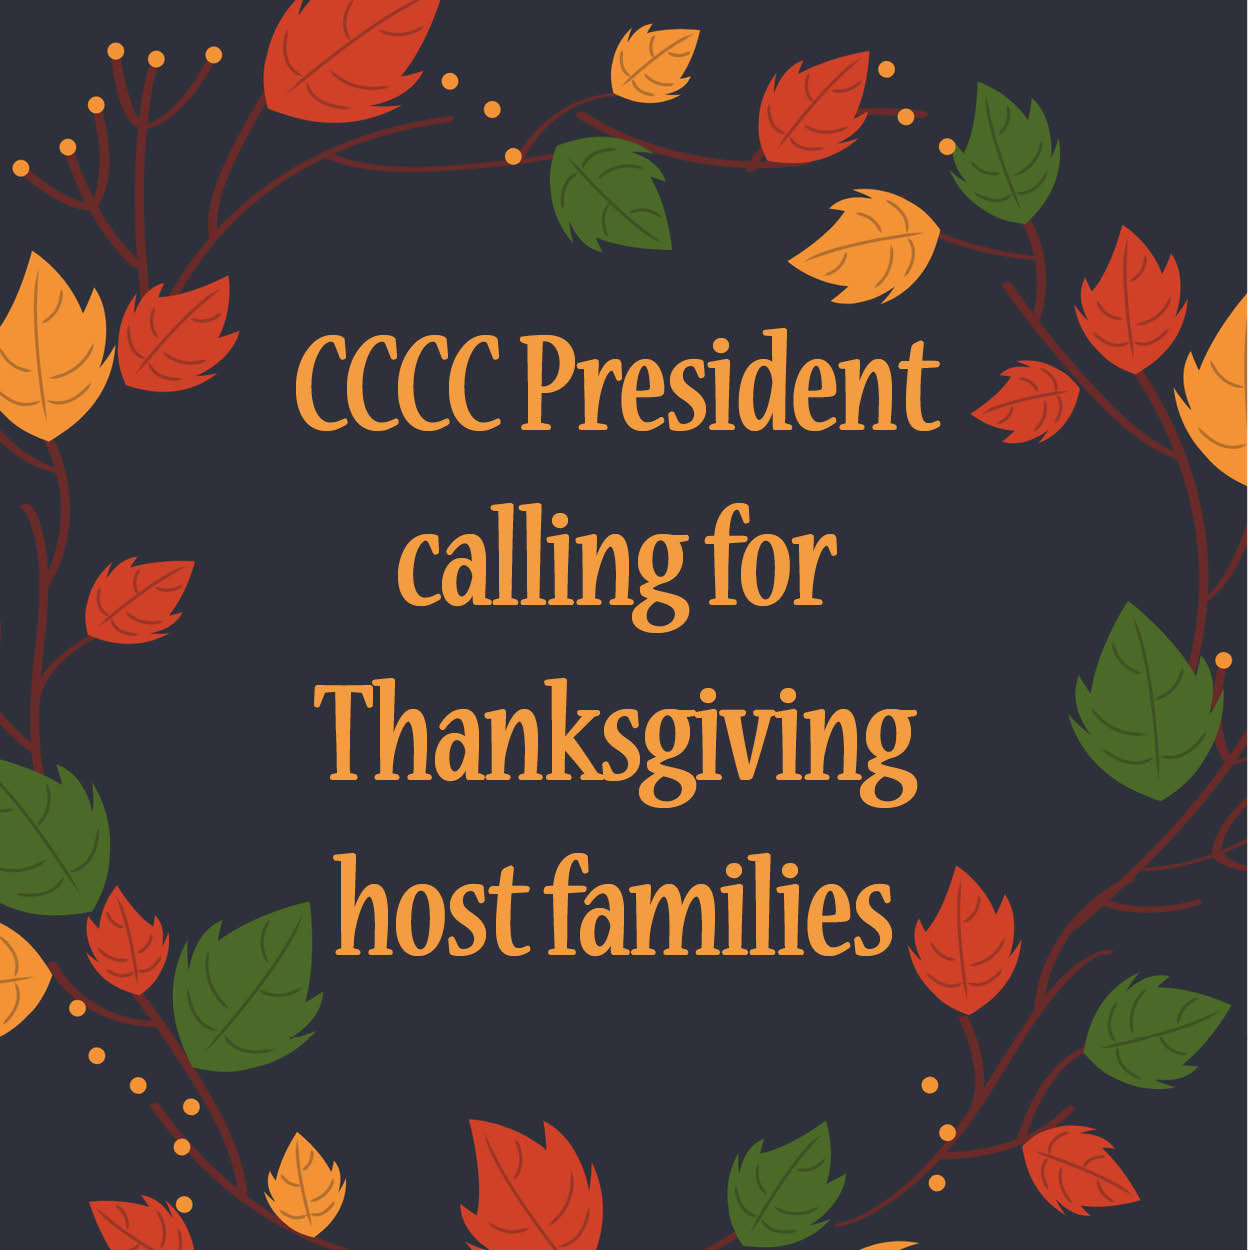 CCCC President calling for Thanksgiving hosts.